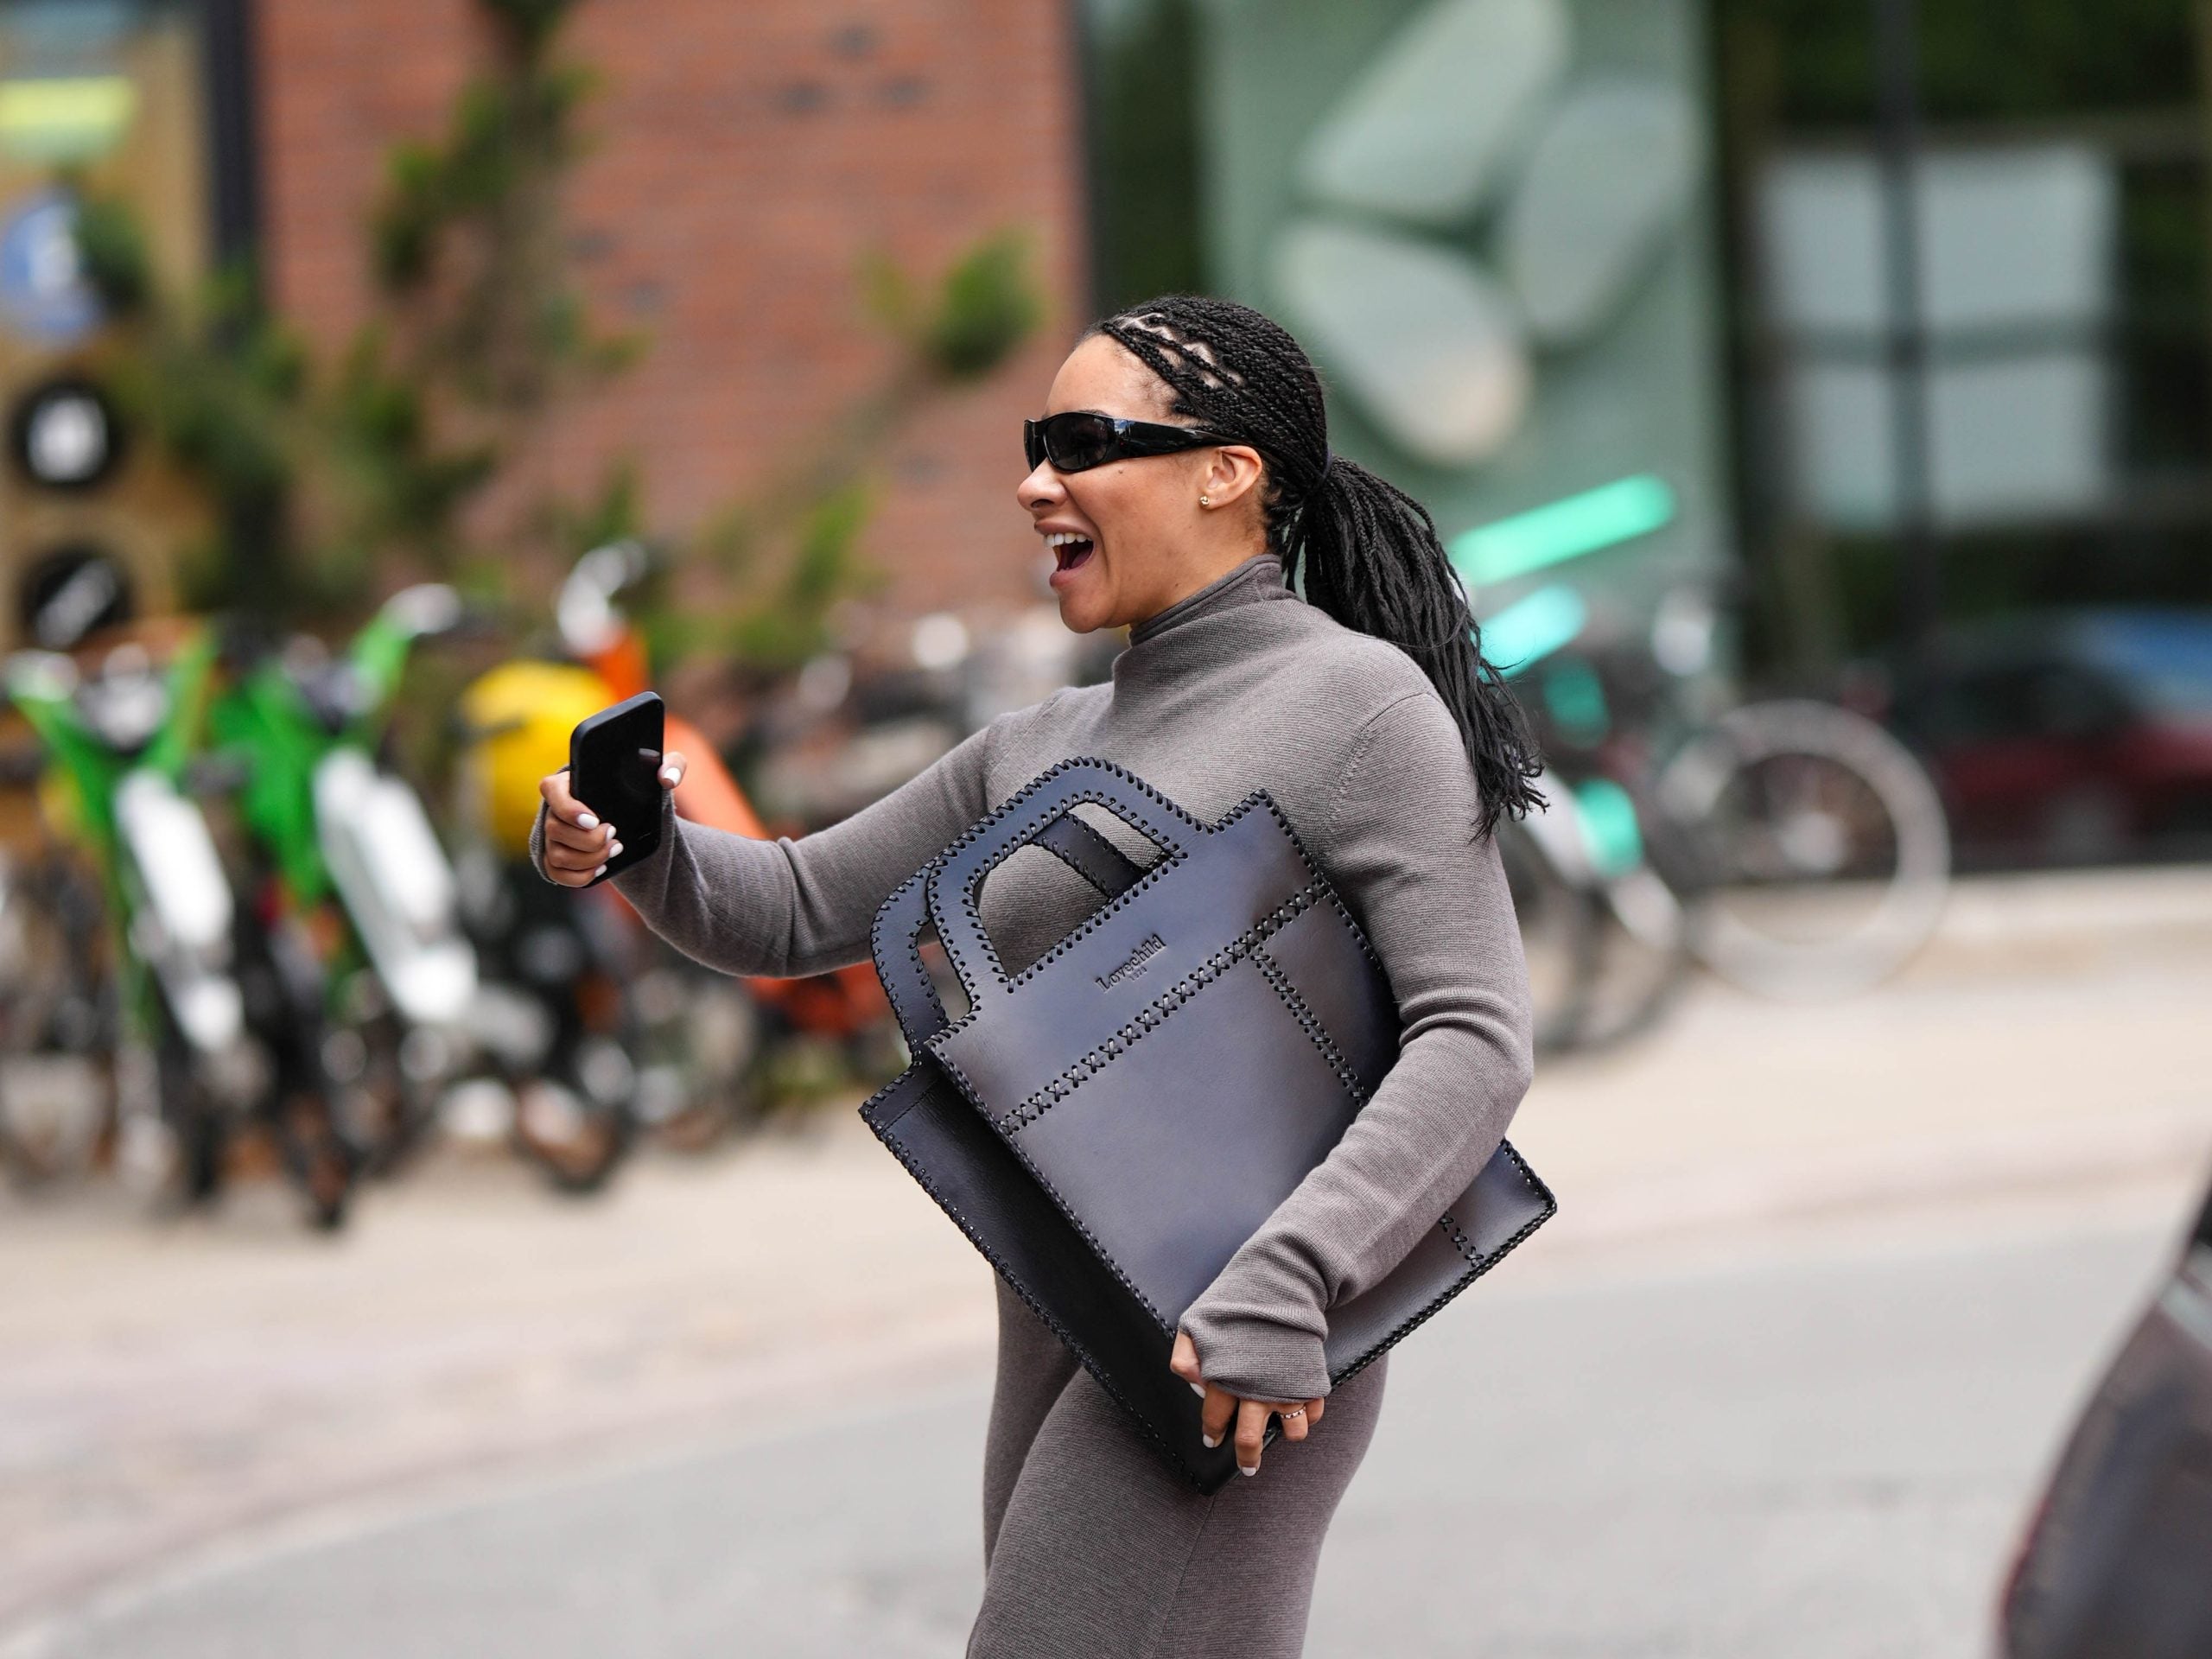 Head To Work In Style With These 7 Chic Bags